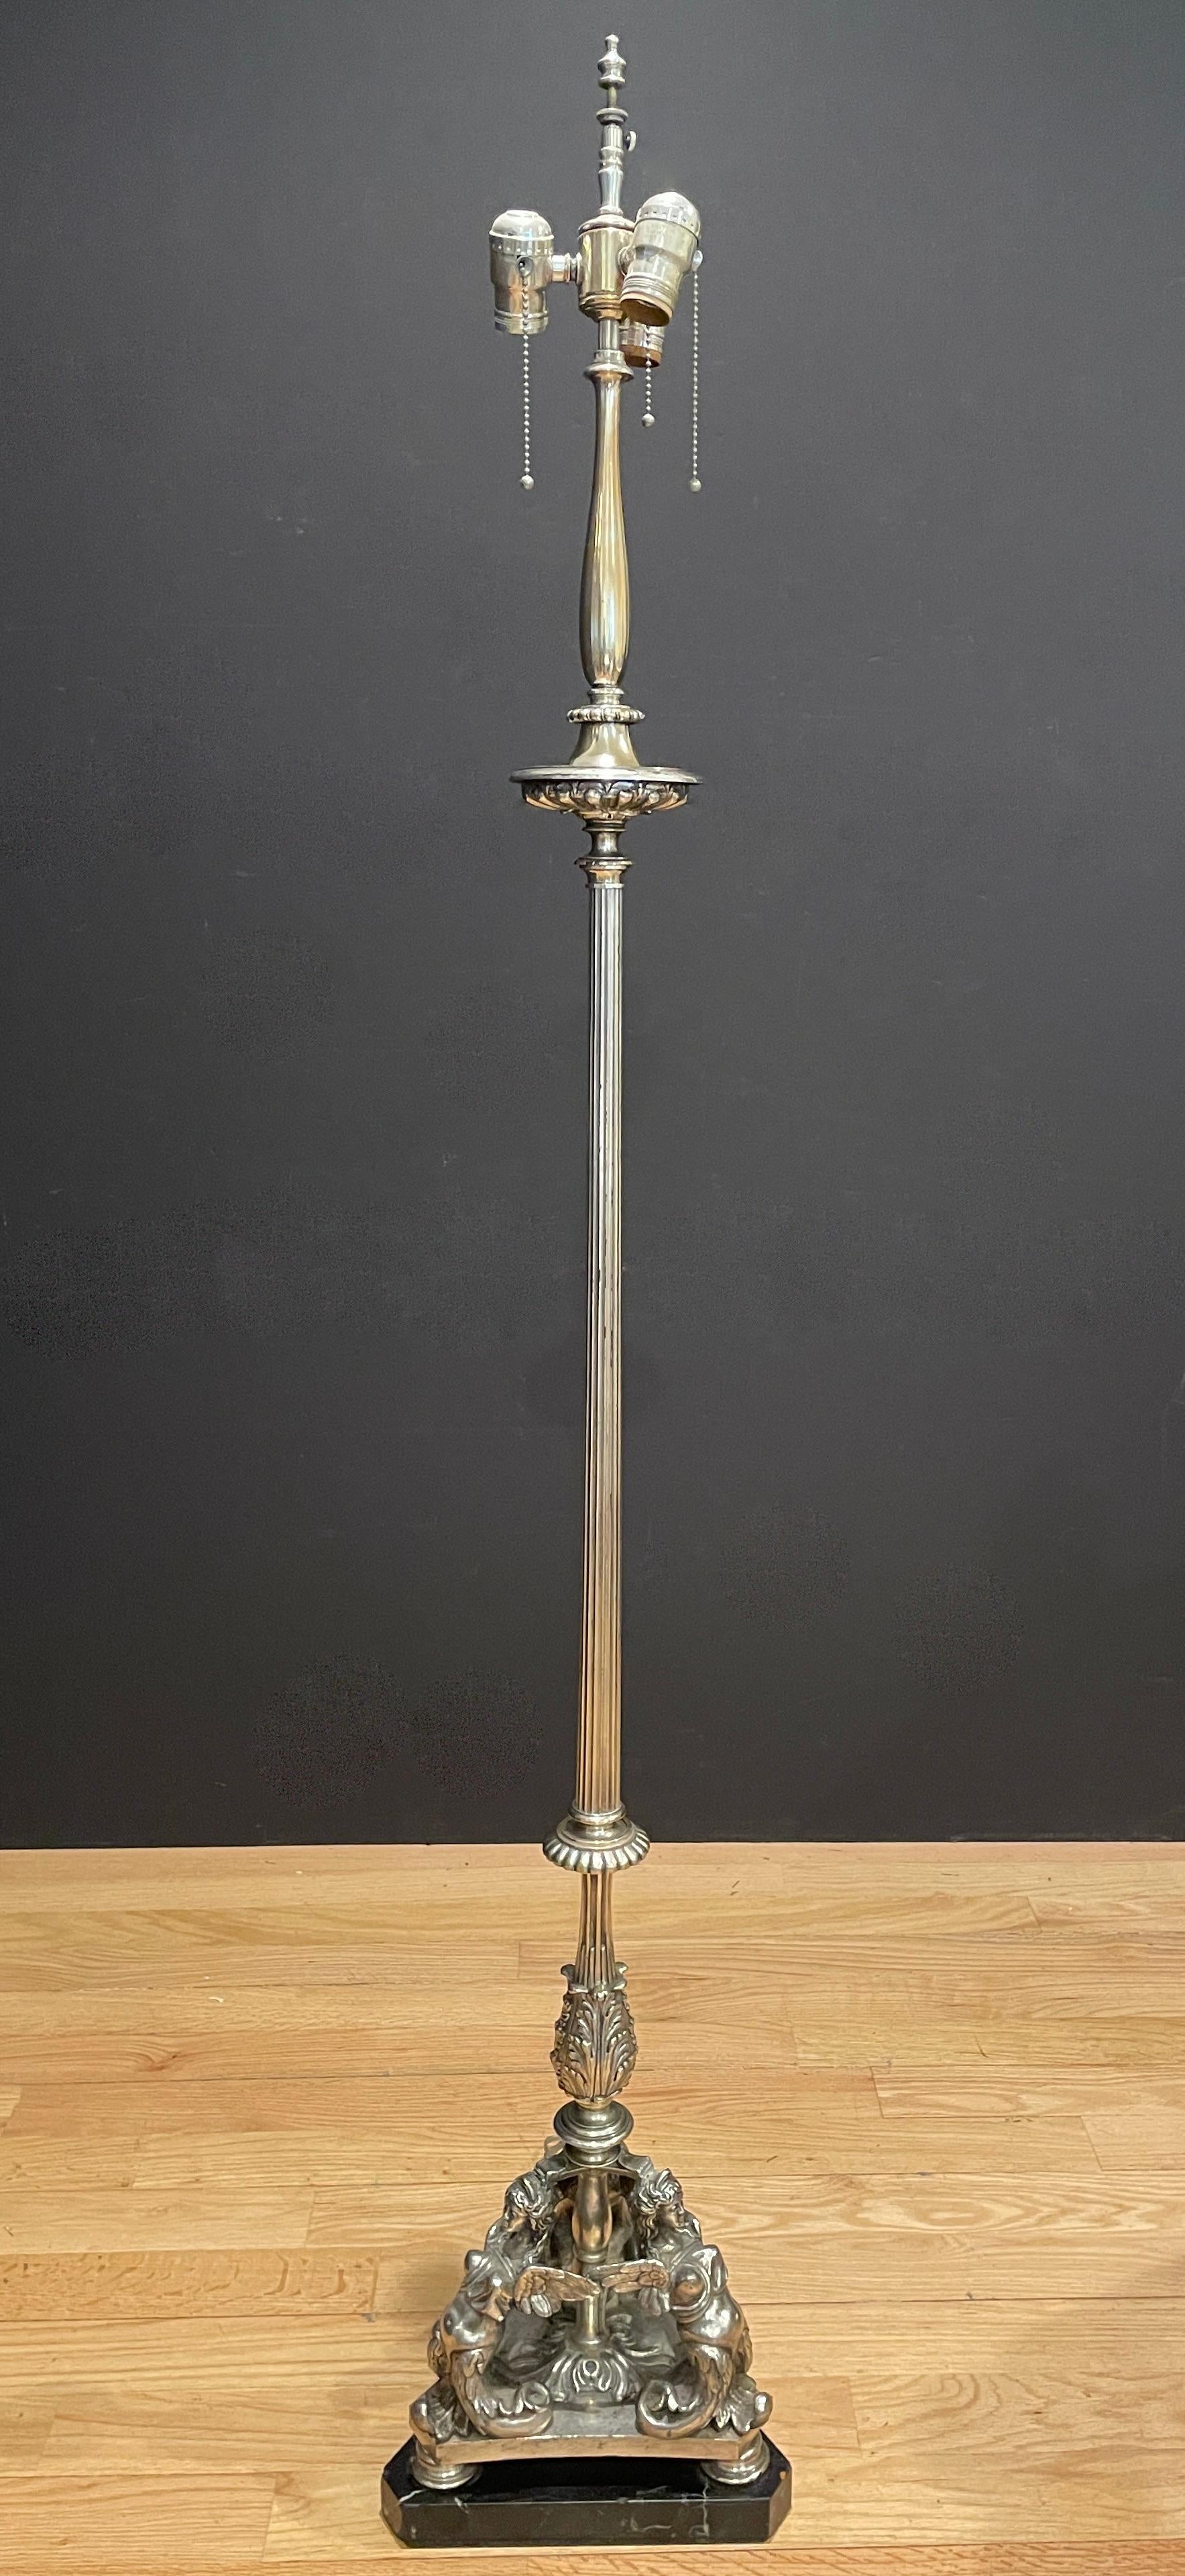 Italian Renaissance style bronze floor lamp. Torchiere form lamp in Grand Tour style Circa 1900, baluster shaft with mermaid and amorini decorations, tripod mermaid and swag legs, raised on triangular shaped black marble plinth,.